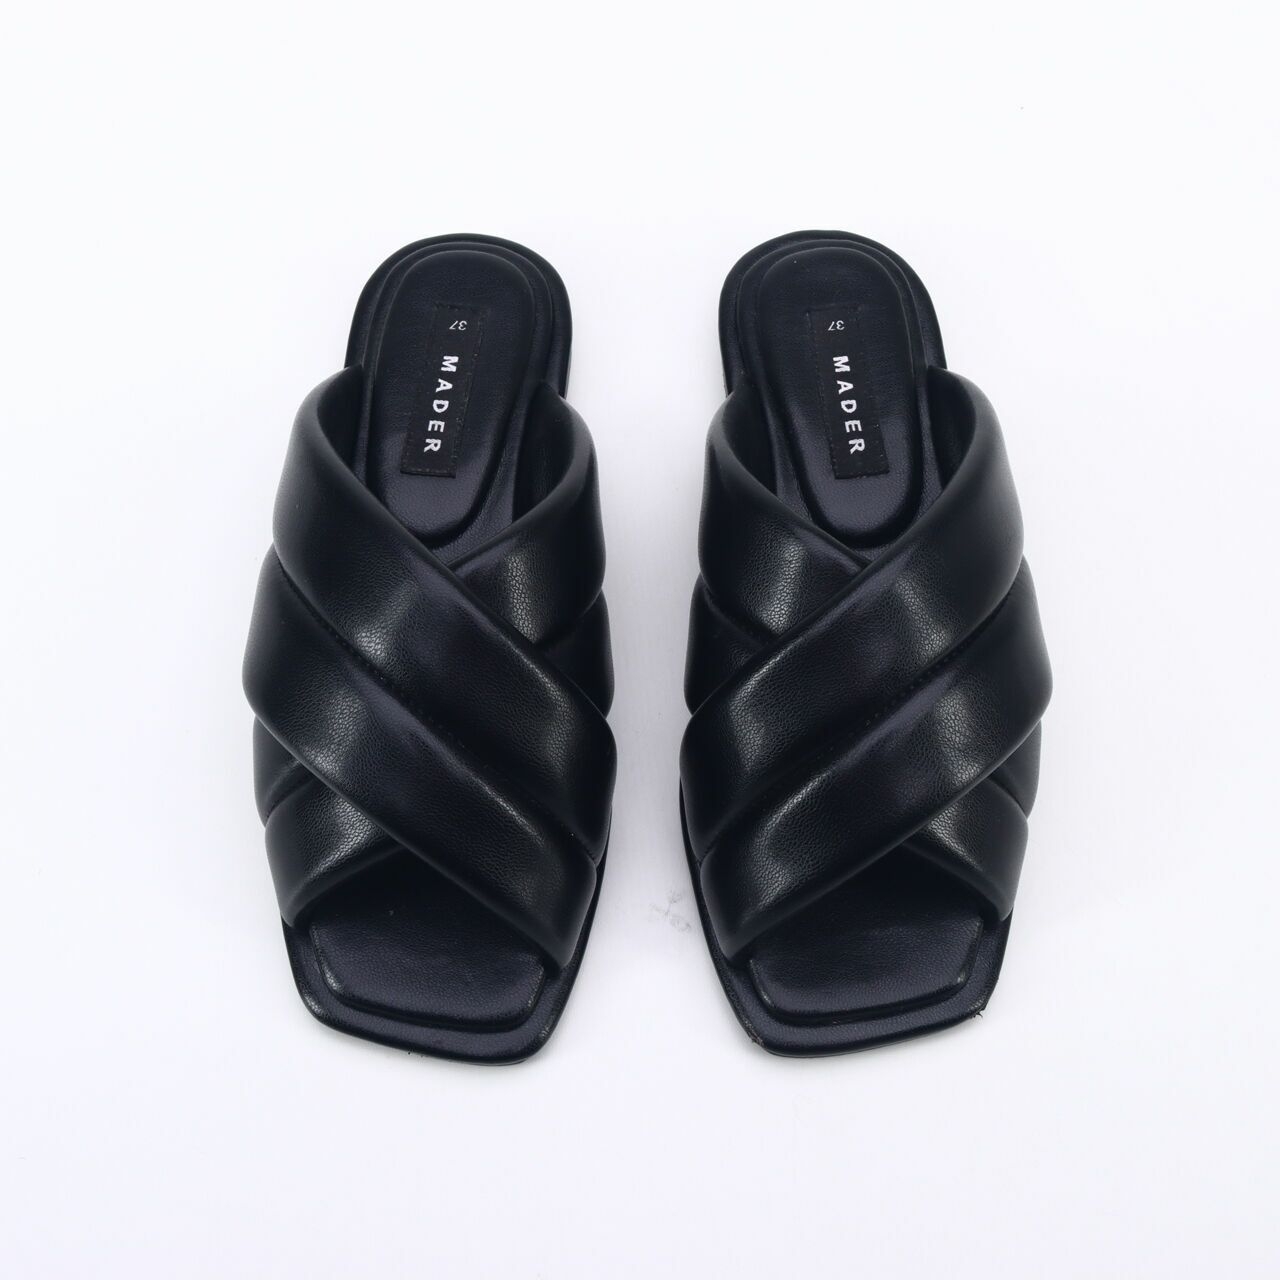 Mader Michelin Crossover Blackout Sandals